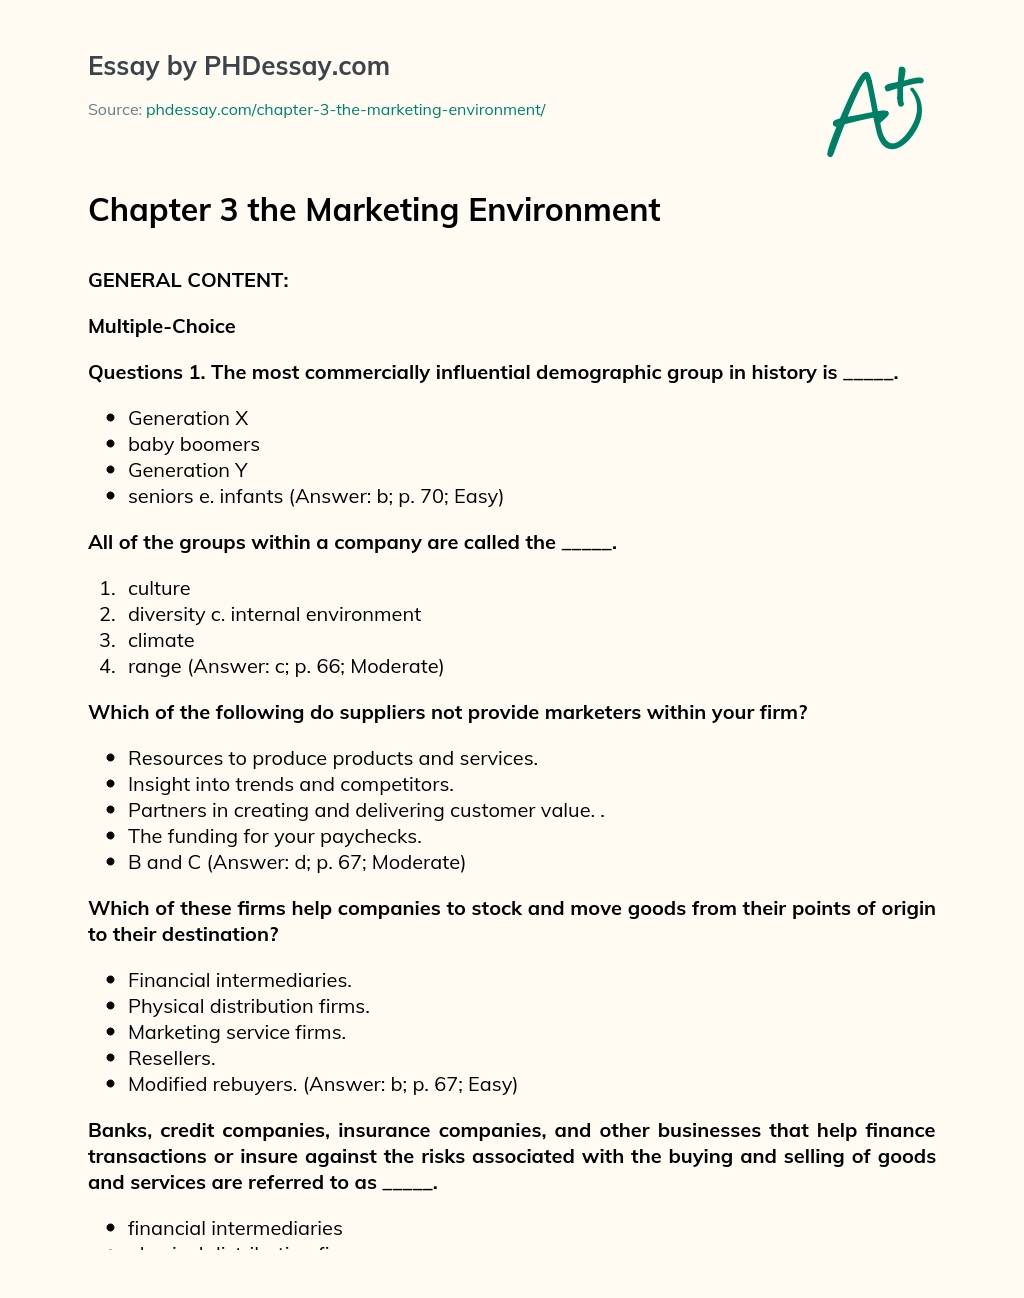 Chapter 3 the Marketing Environment essay